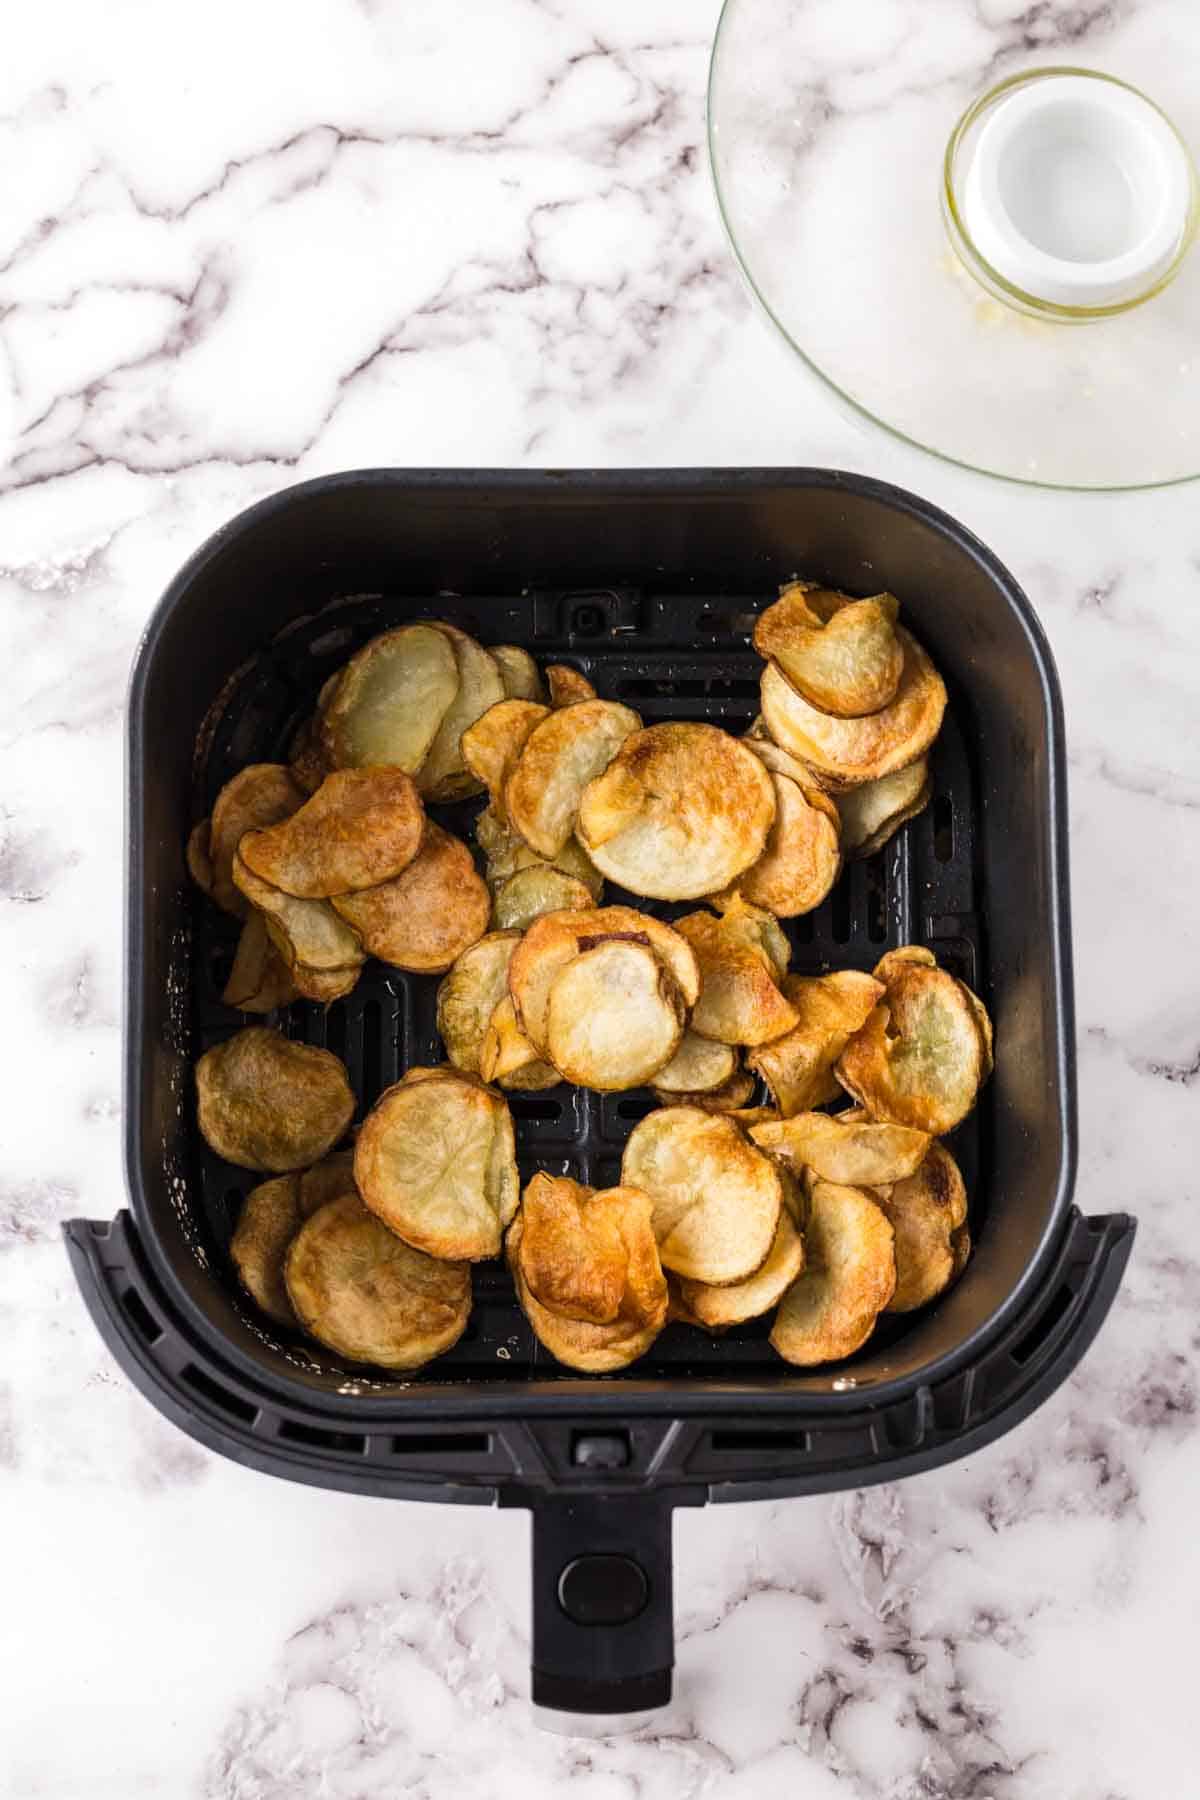 black air fryer basket with fried potato chips.